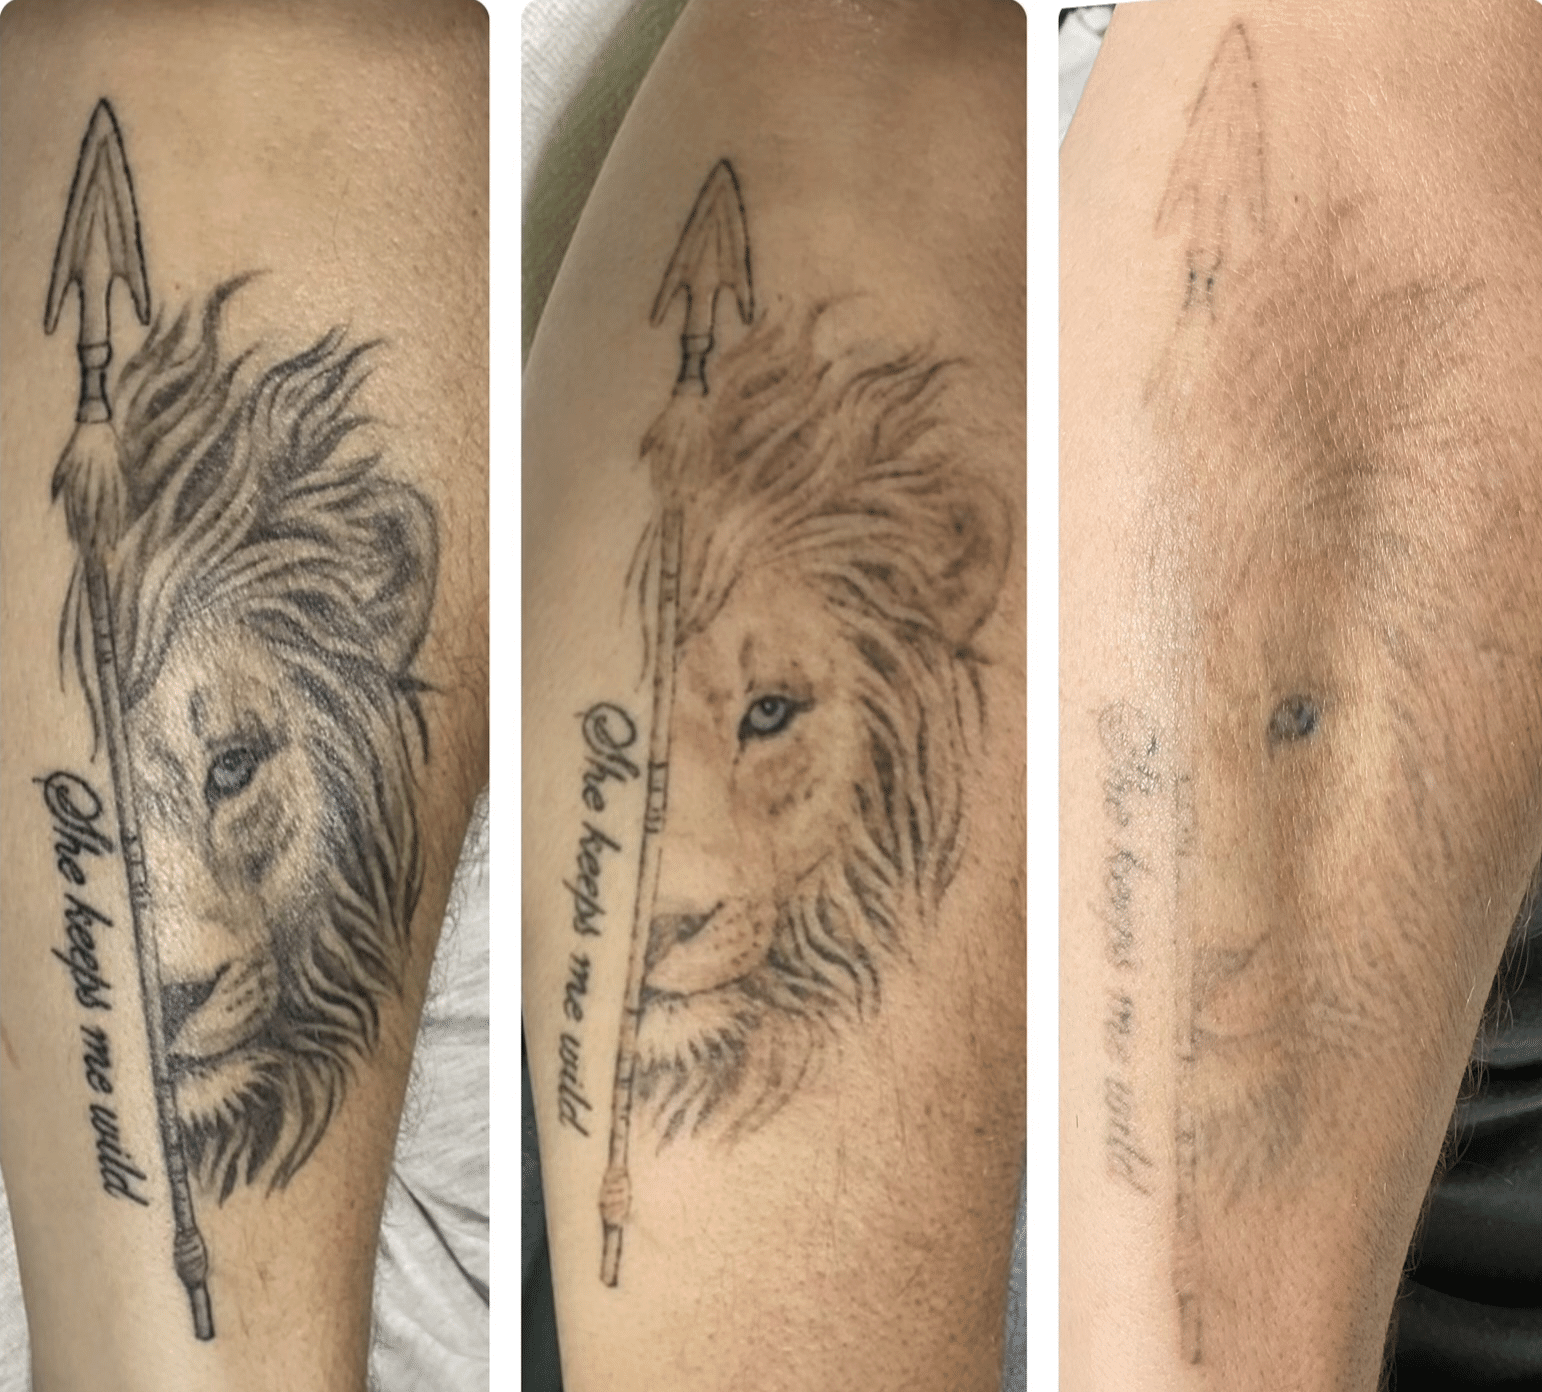 Aspire Training Clinics Perth - Need to get your tattoo removed? We are  offering a special price of $50 for all laser tattoo removal appointments  per session. Price = $50 per treatment (